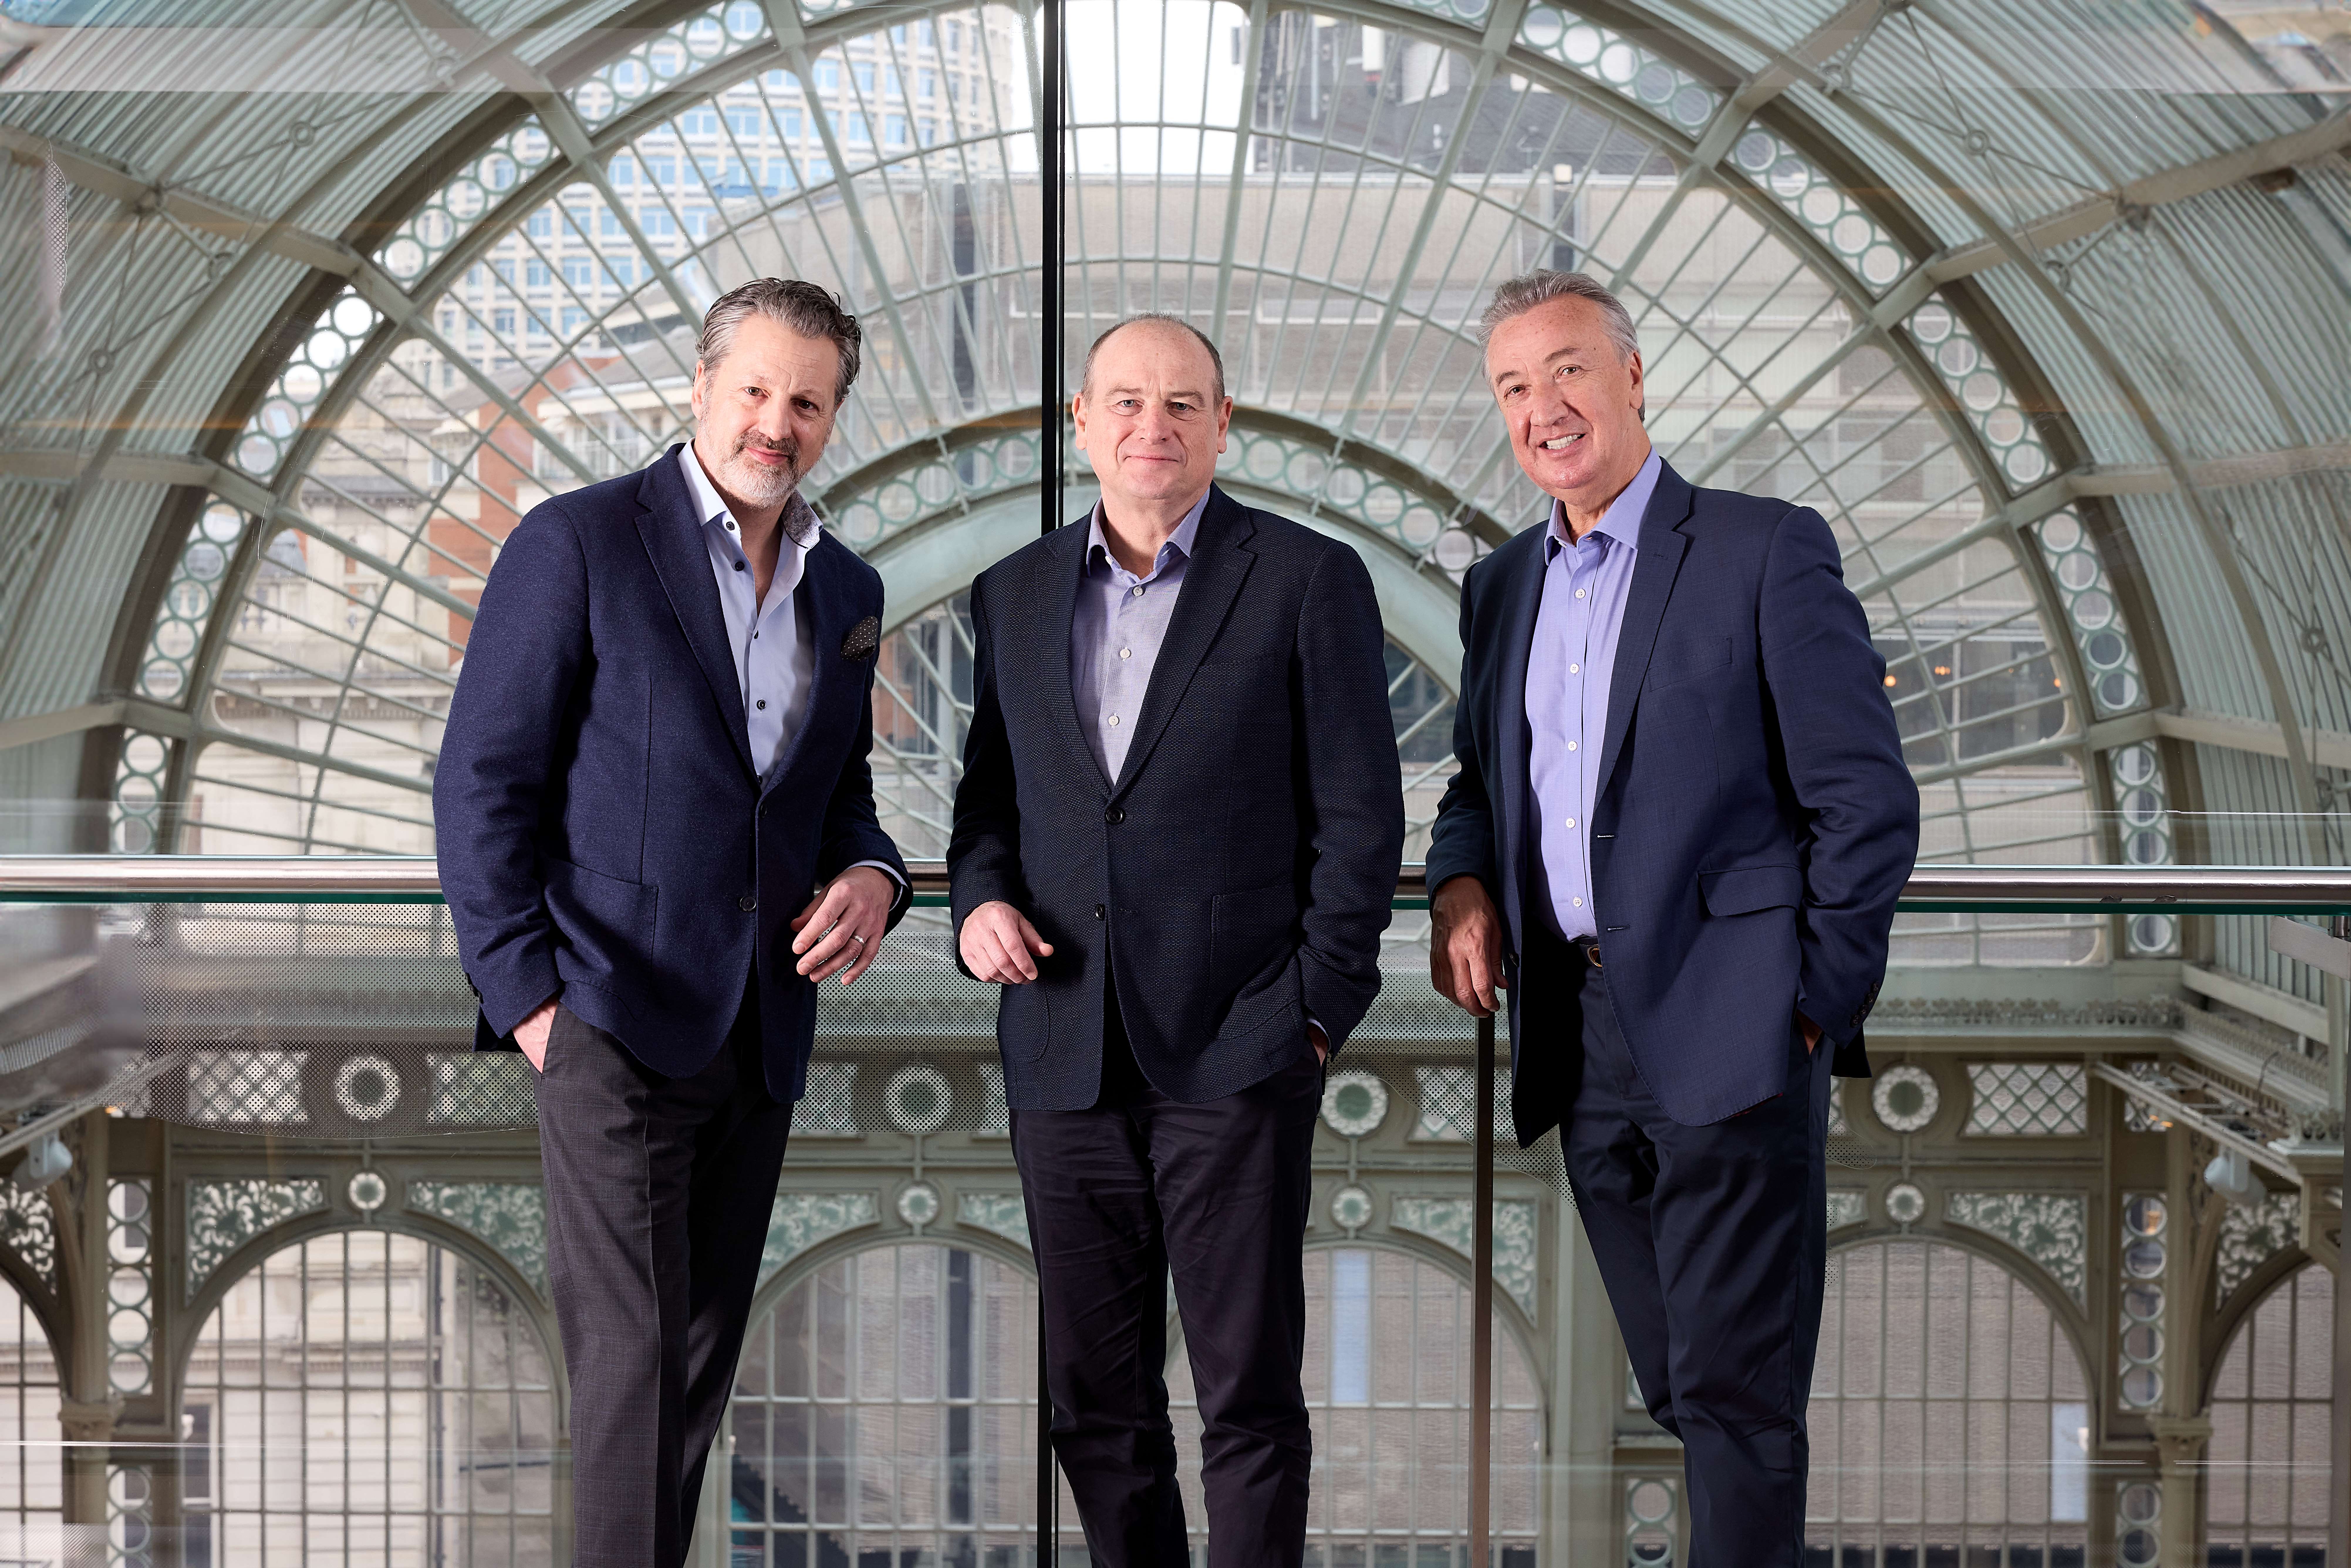 CH&CO joins Compass Group UK & Ireland in landmark acquisition